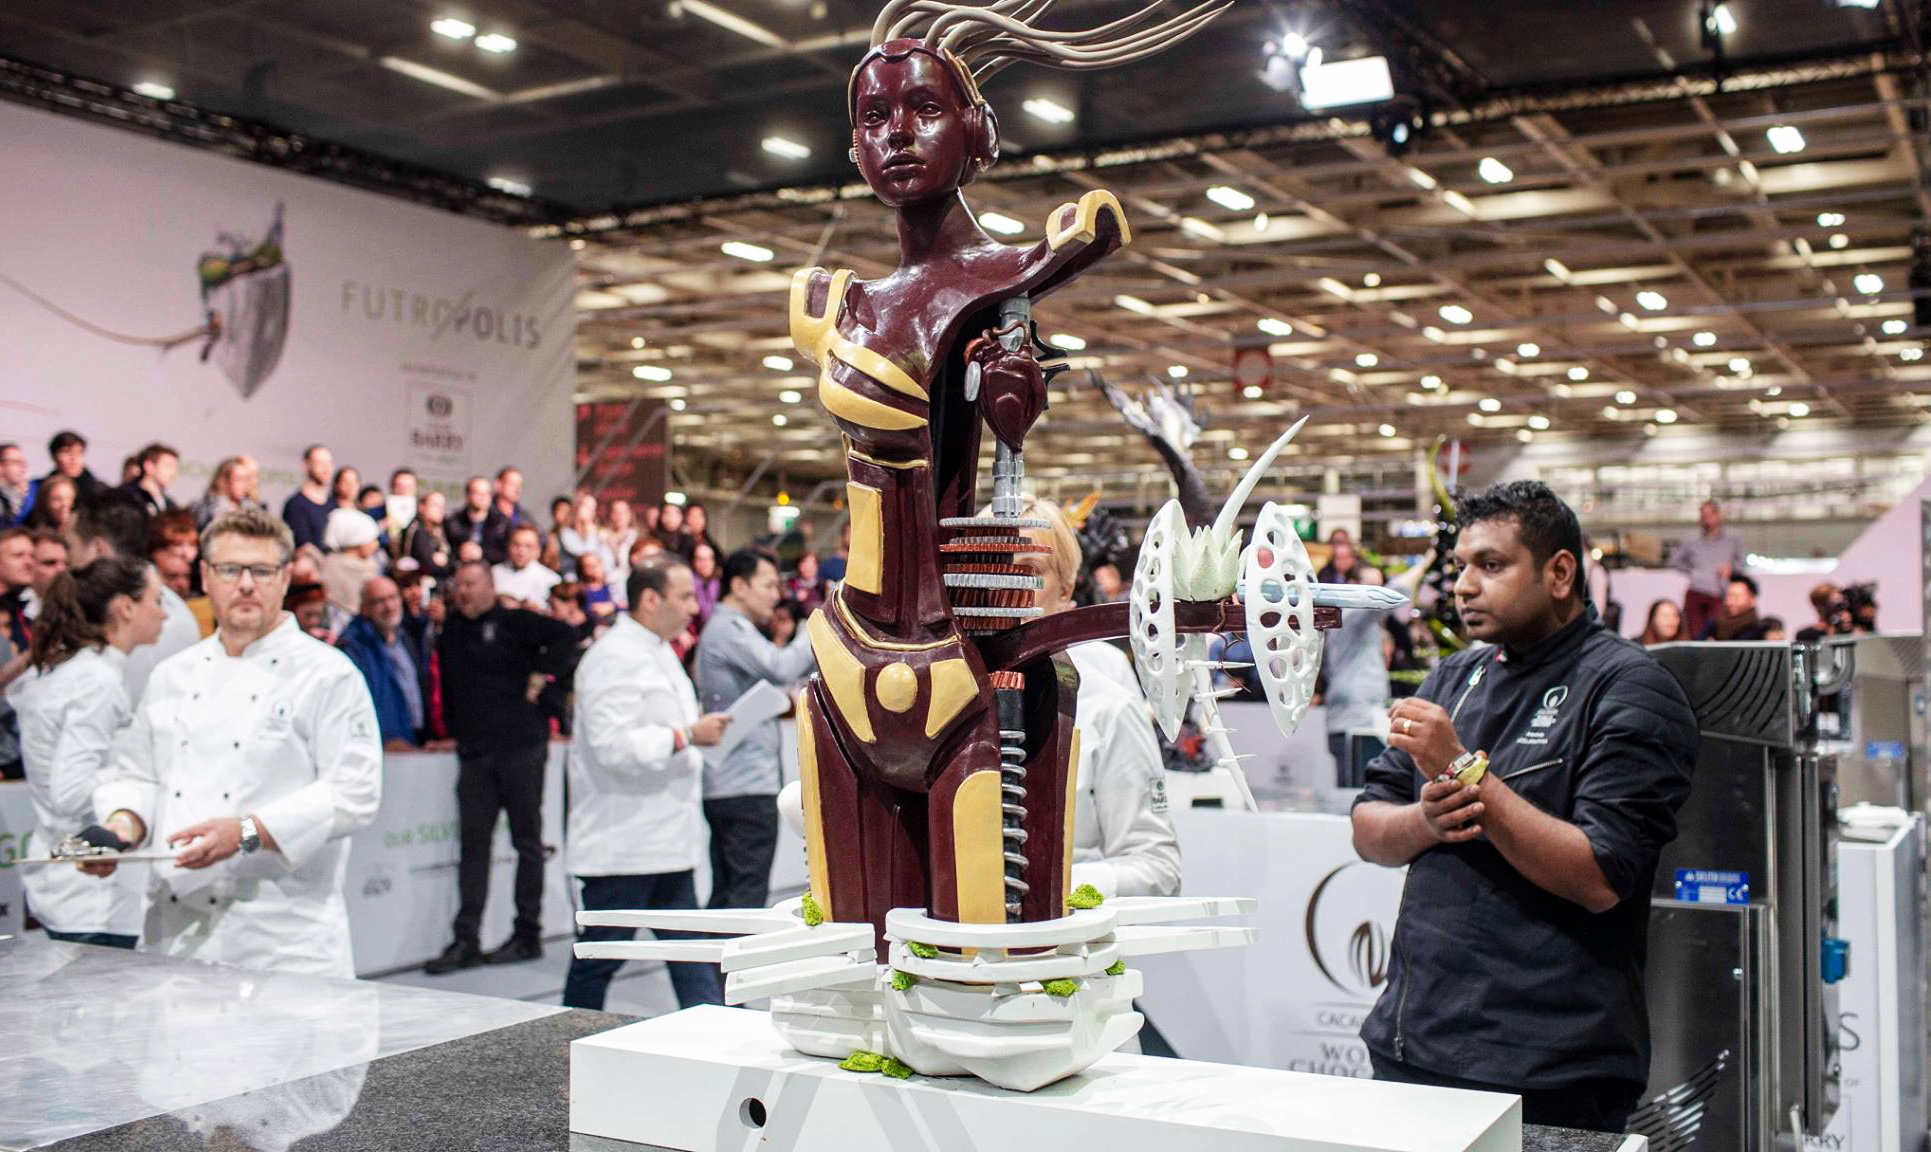 World Chocolate Masters 21/22, Middle East edition